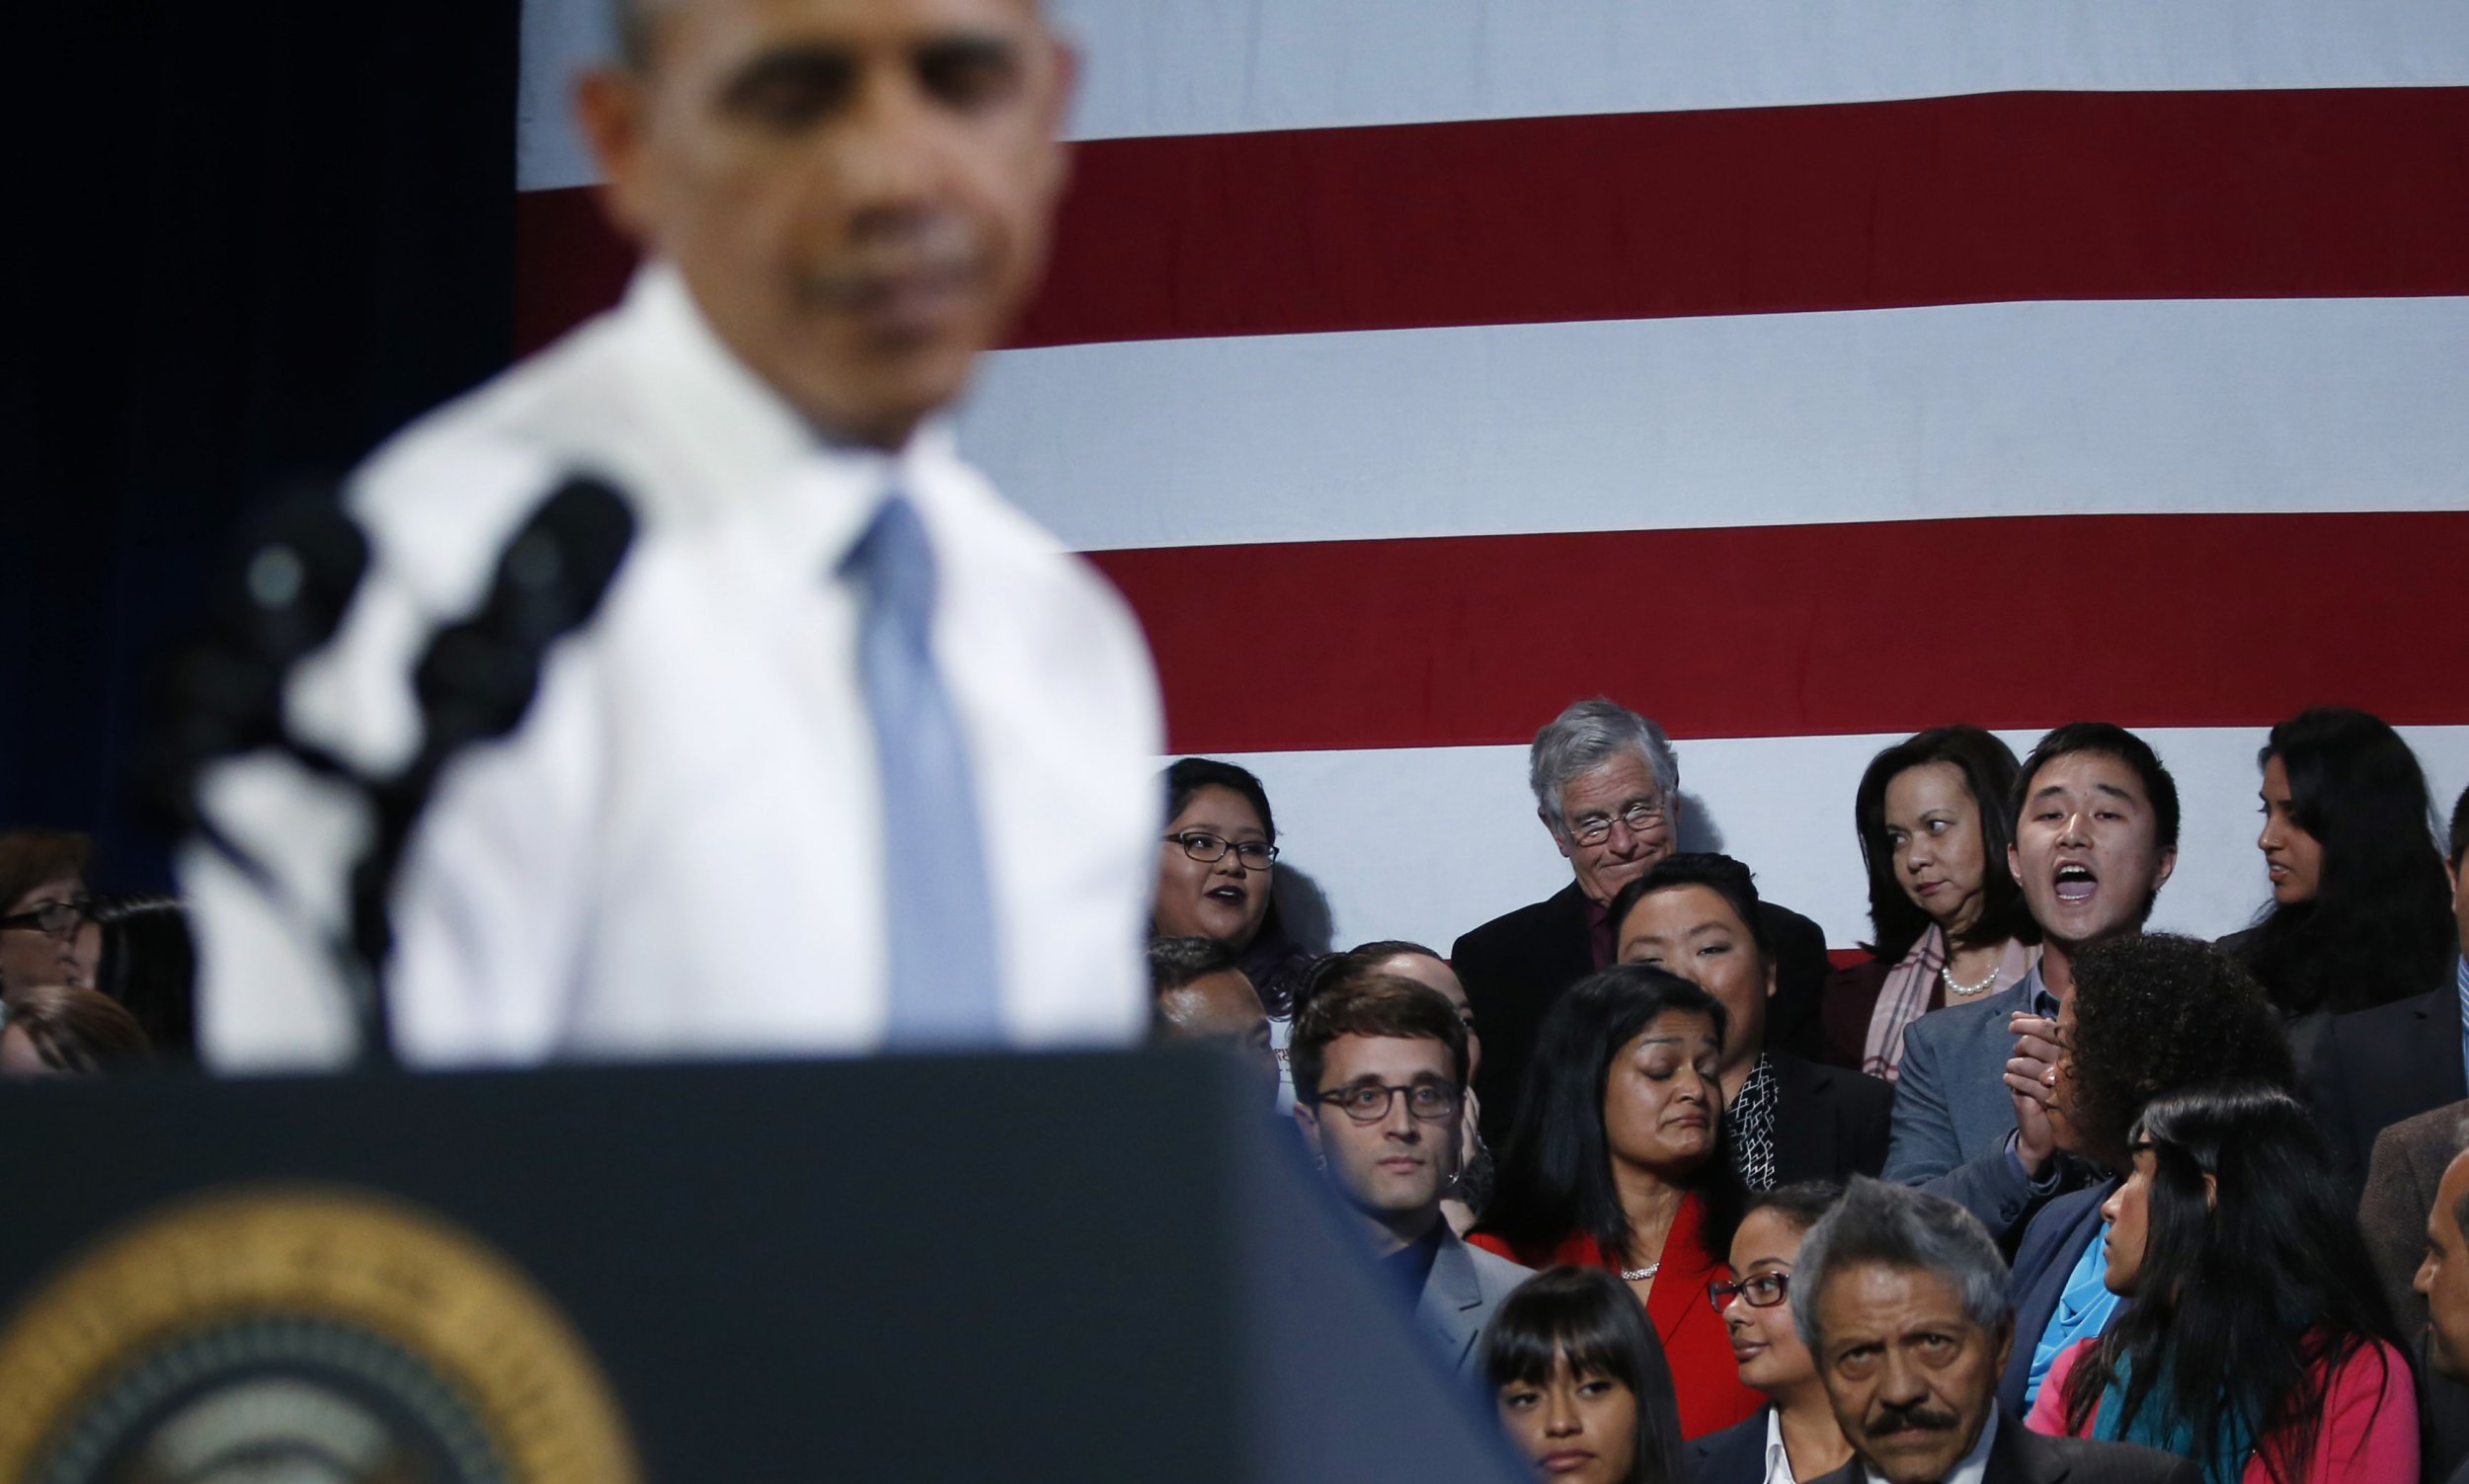 Watch Obama Get Heckled By Deportation Protester During Presidents Immigration Reform Speech